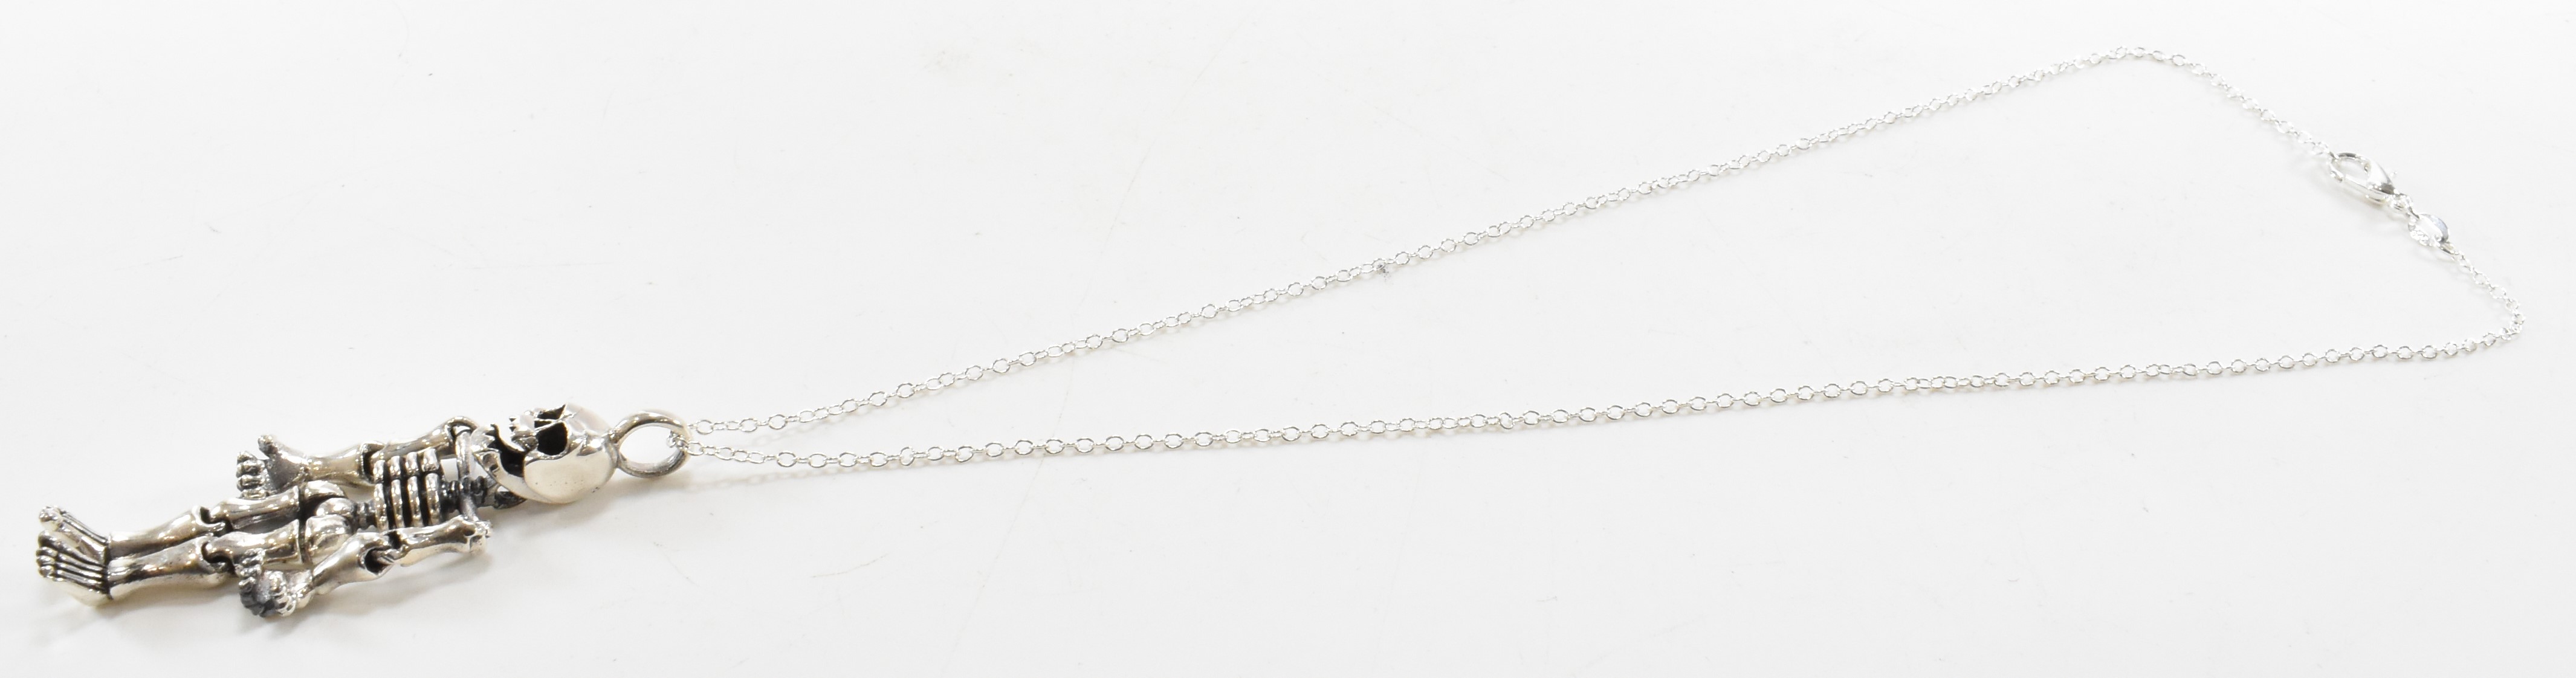 SILVER SKELETON PENDANT NECKLACE - Image 8 of 10